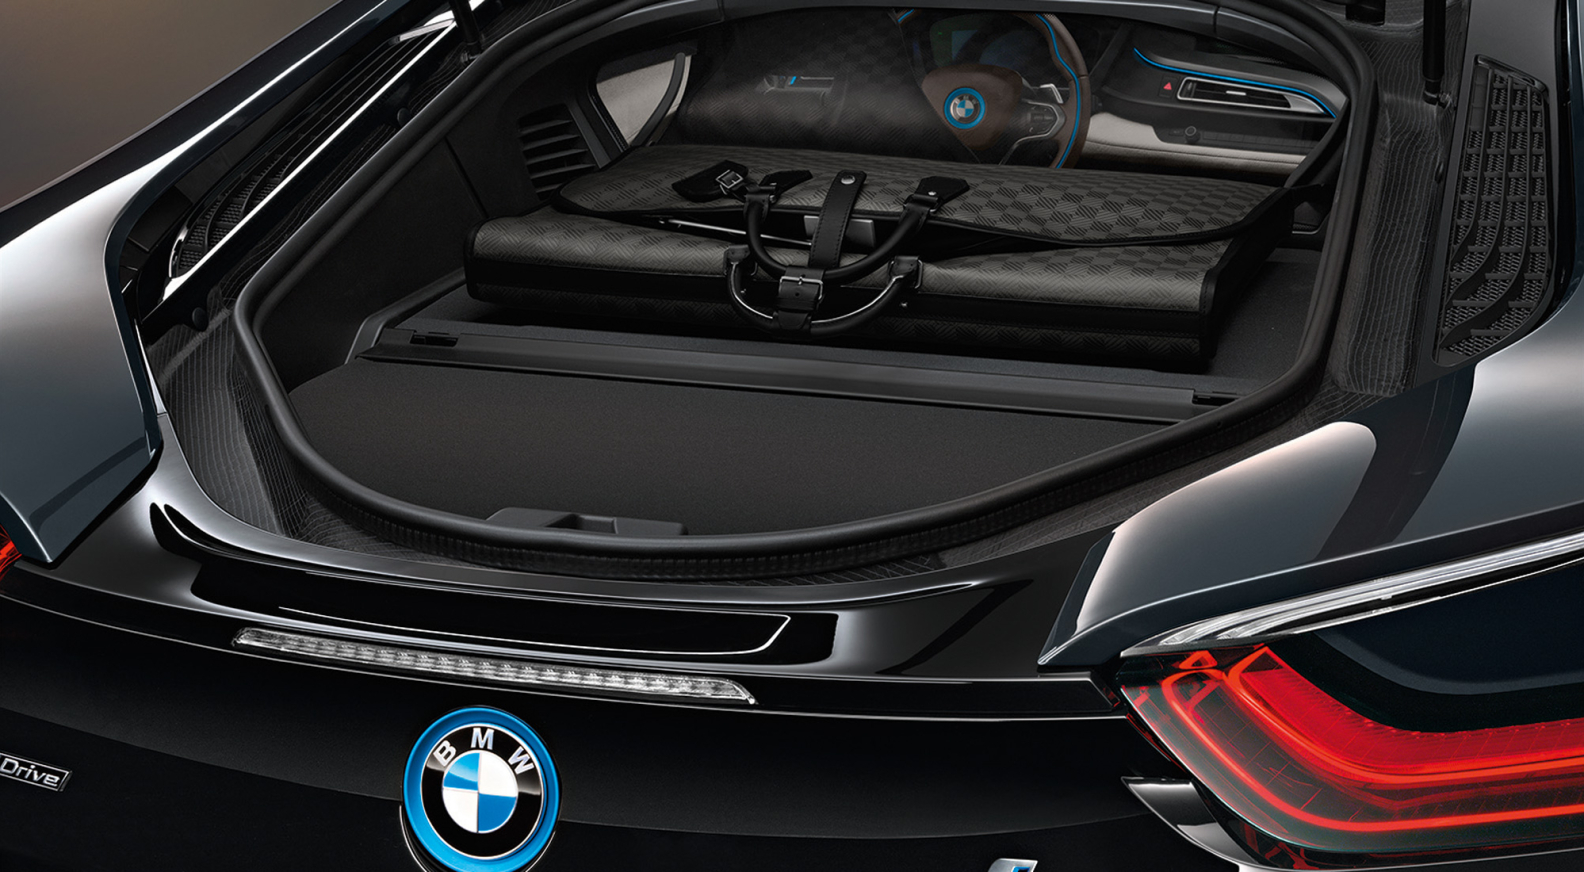 Dual Branding Campaign Of BMW And Louis Vuitton Ppt Slides Background Images